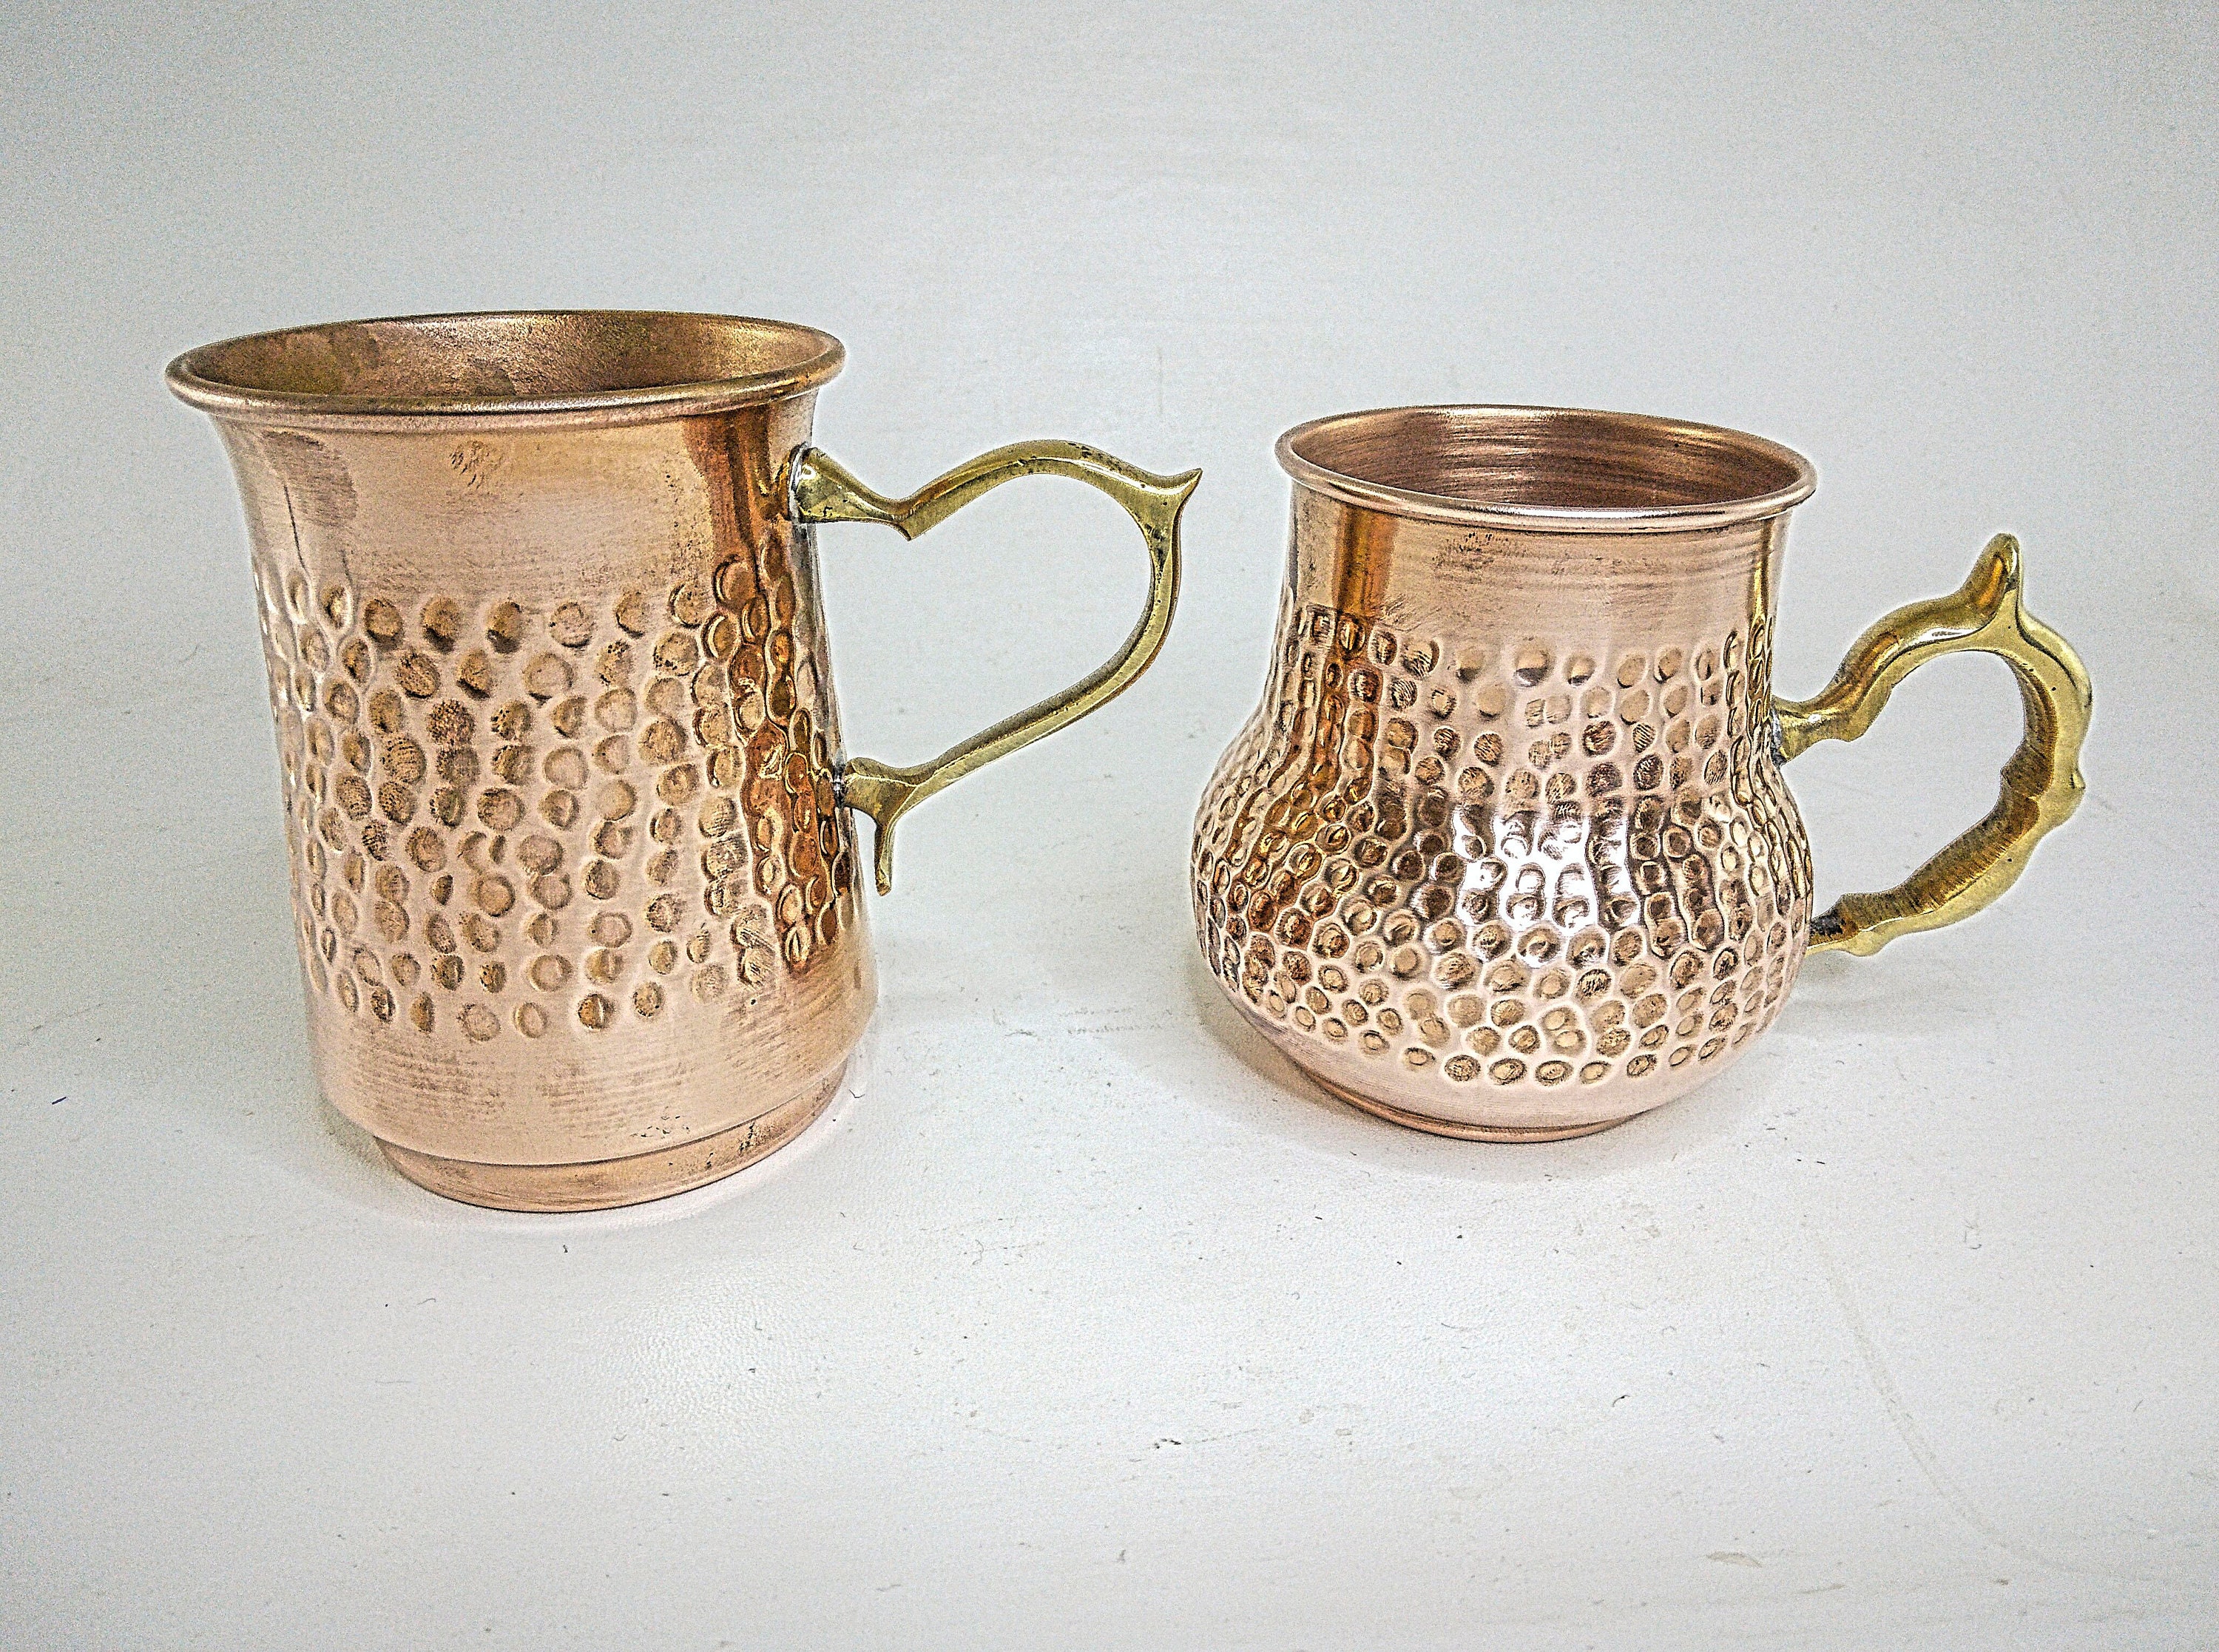 6 Pieces Red Copper Mugvintage Moscow Mule Mugcampfire -  in